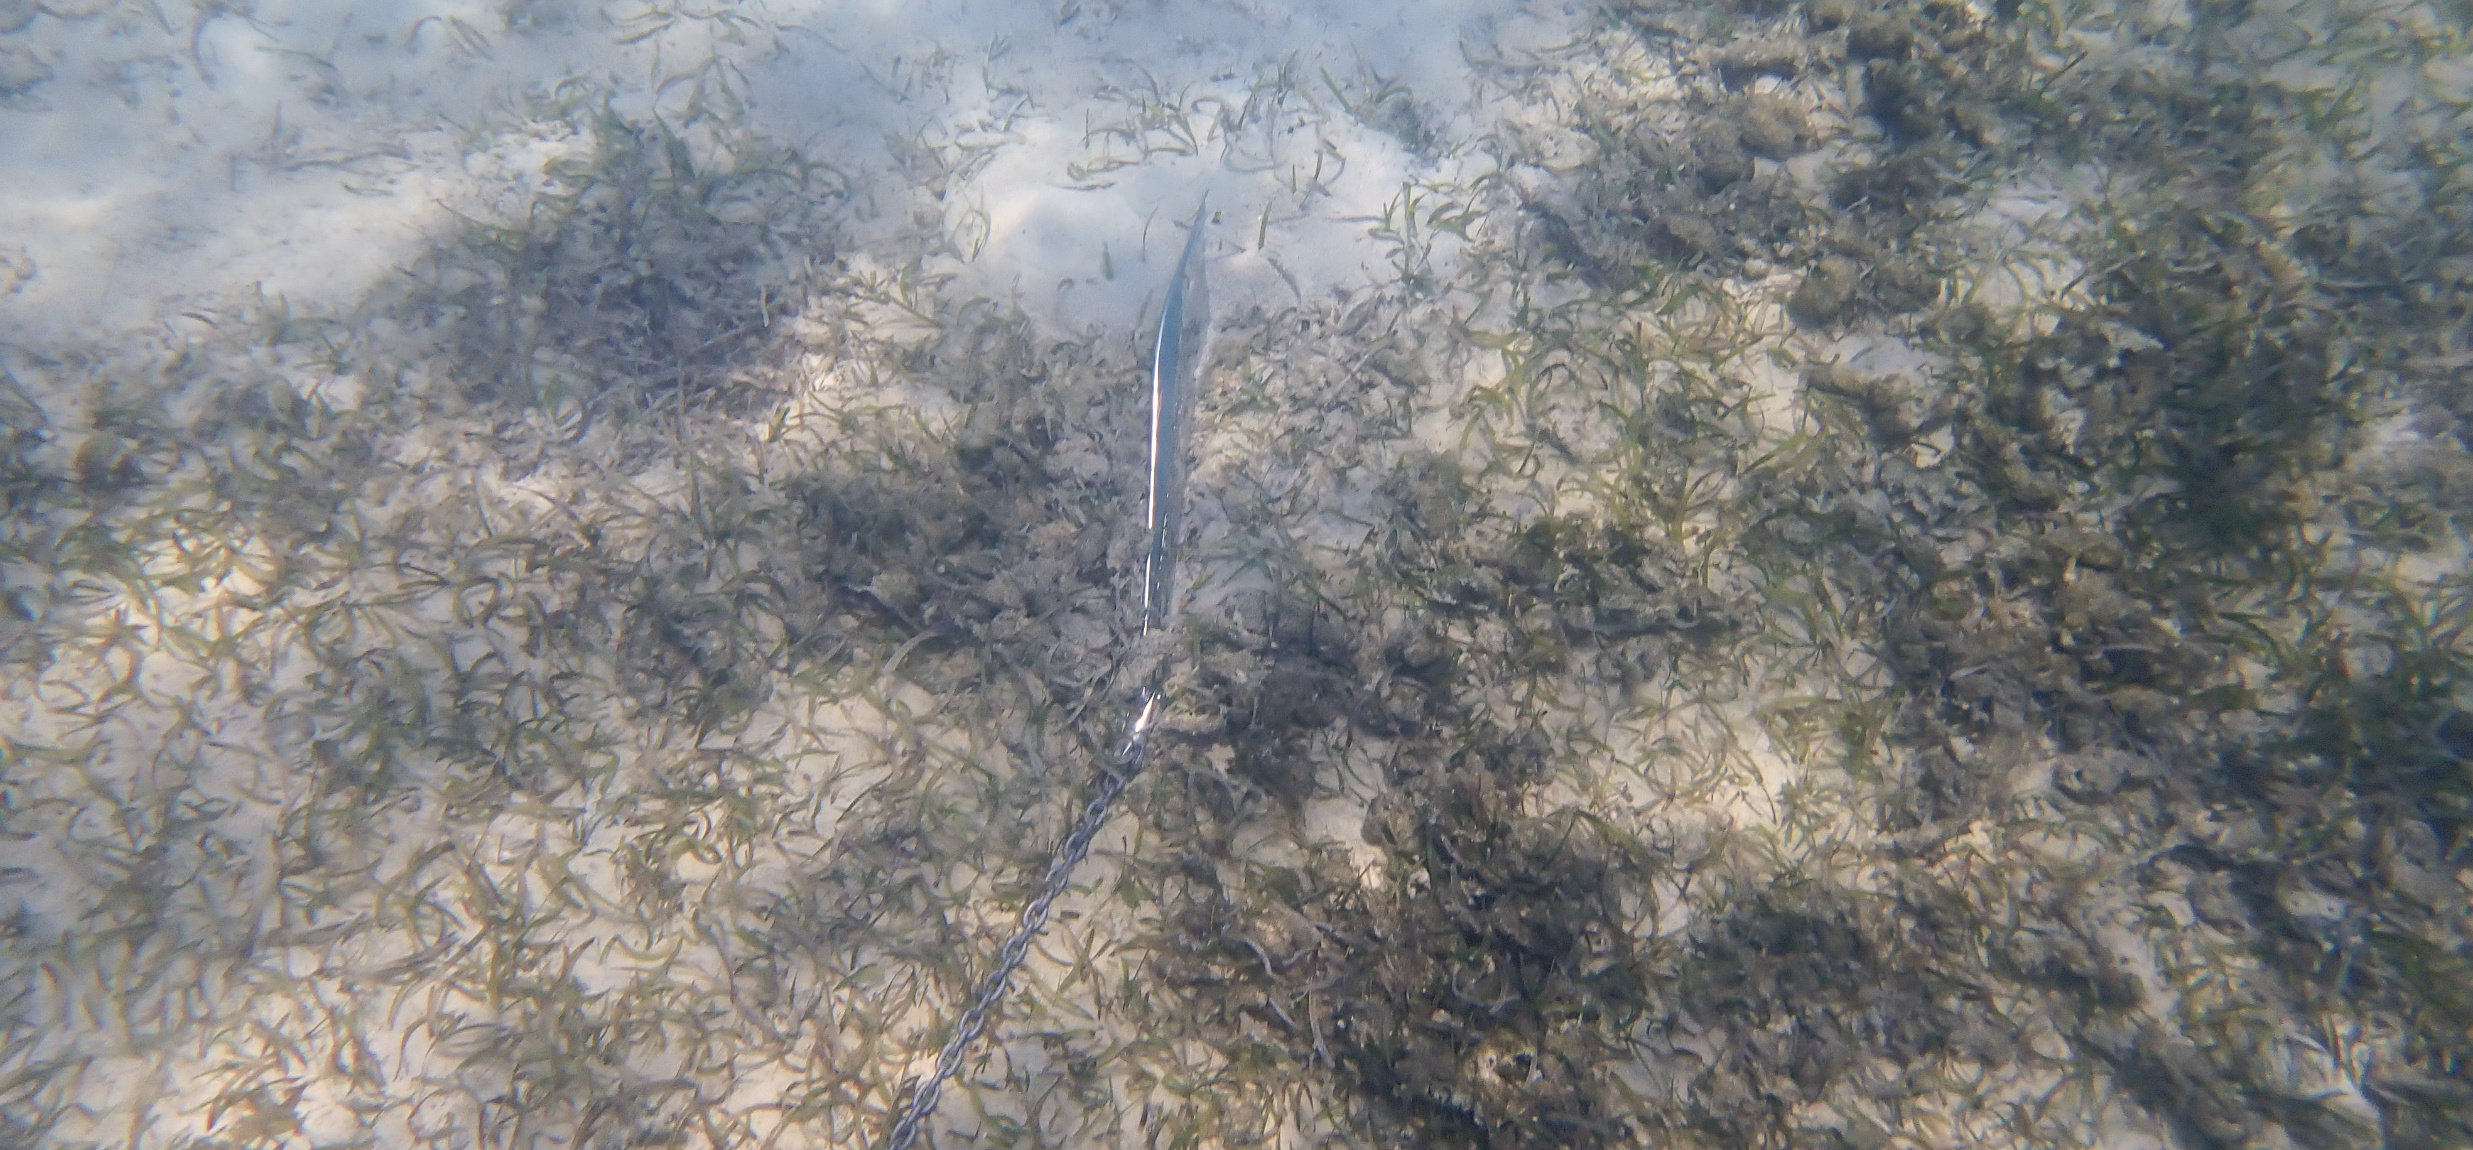 A boat anchor rests in seagrass in Round Bay on St. John. (Photo by Kathy Vargo)